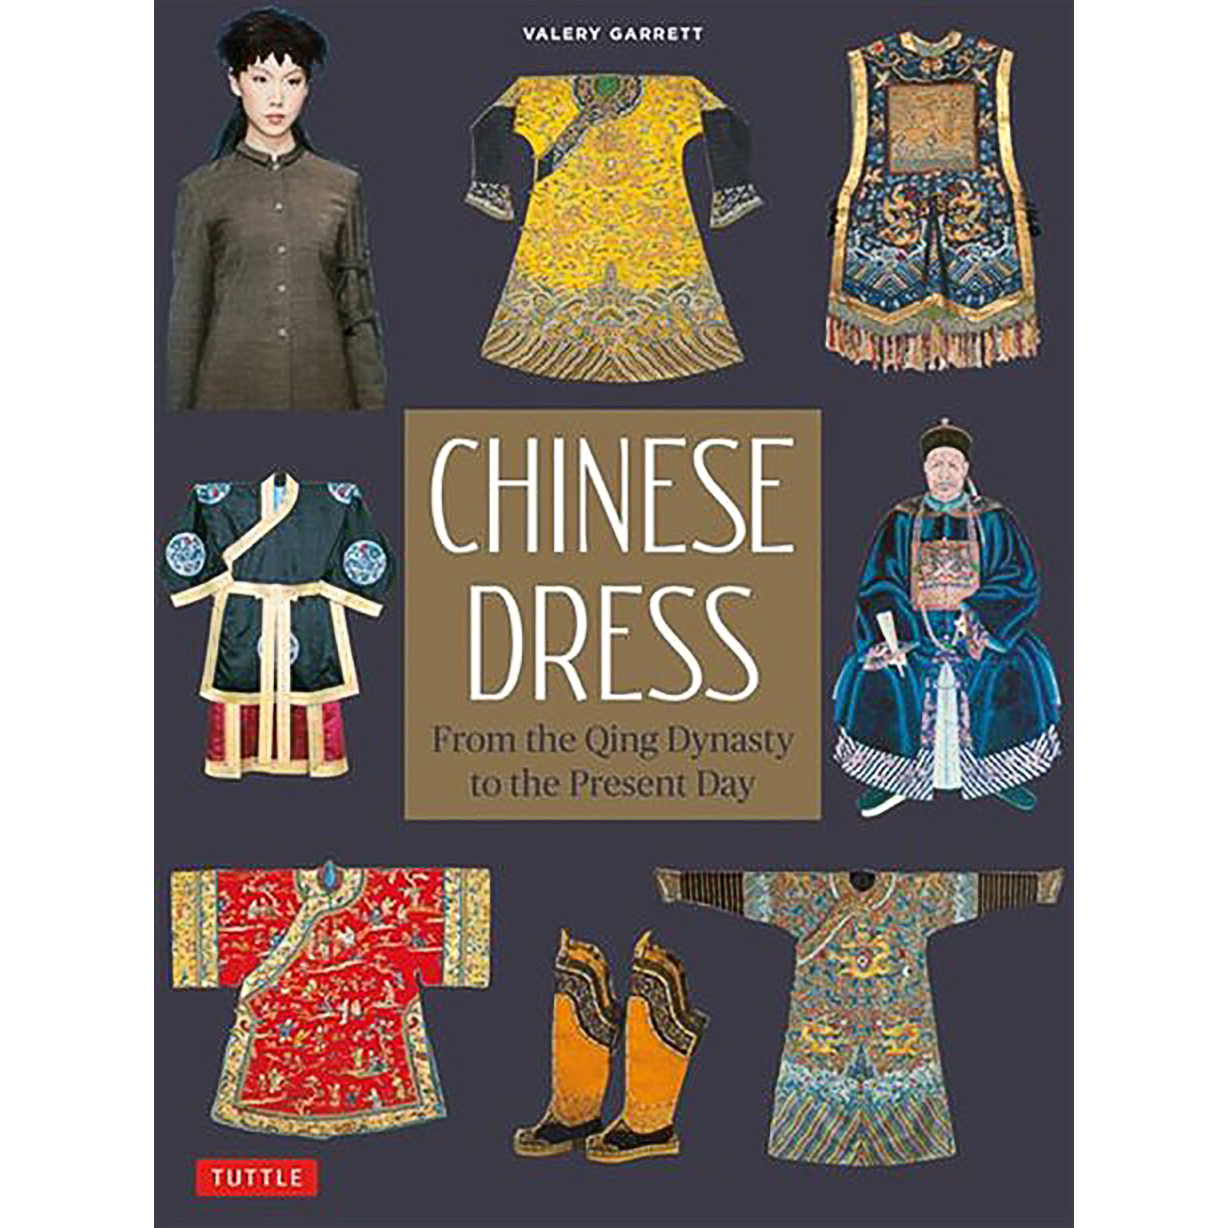 Perfect Costume Peasant39s Dress In South Song Dynasty